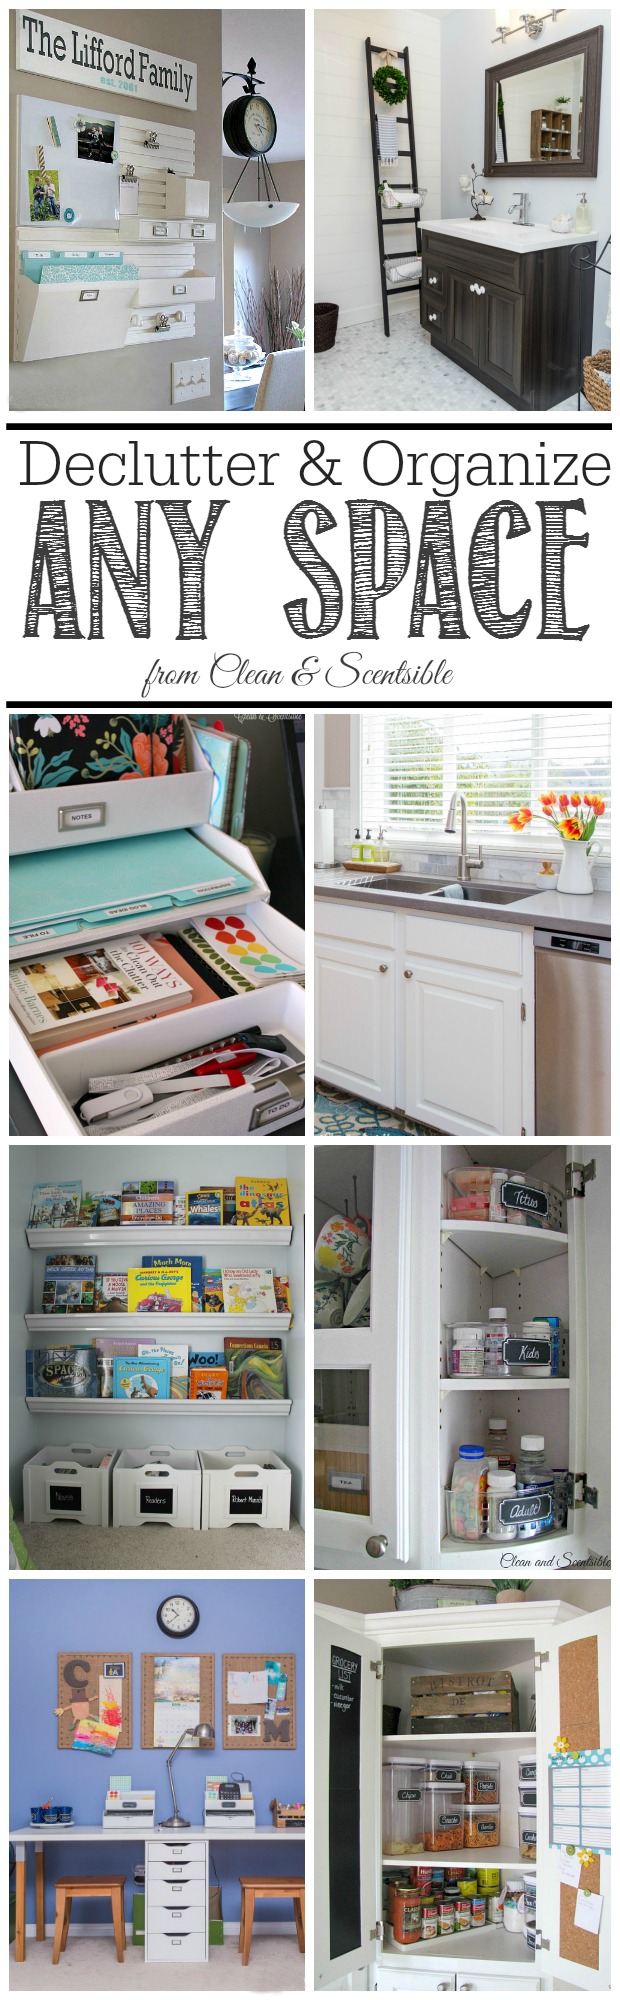 Mom Knows Best: The Best Way To Organize Cluttered Spaces With